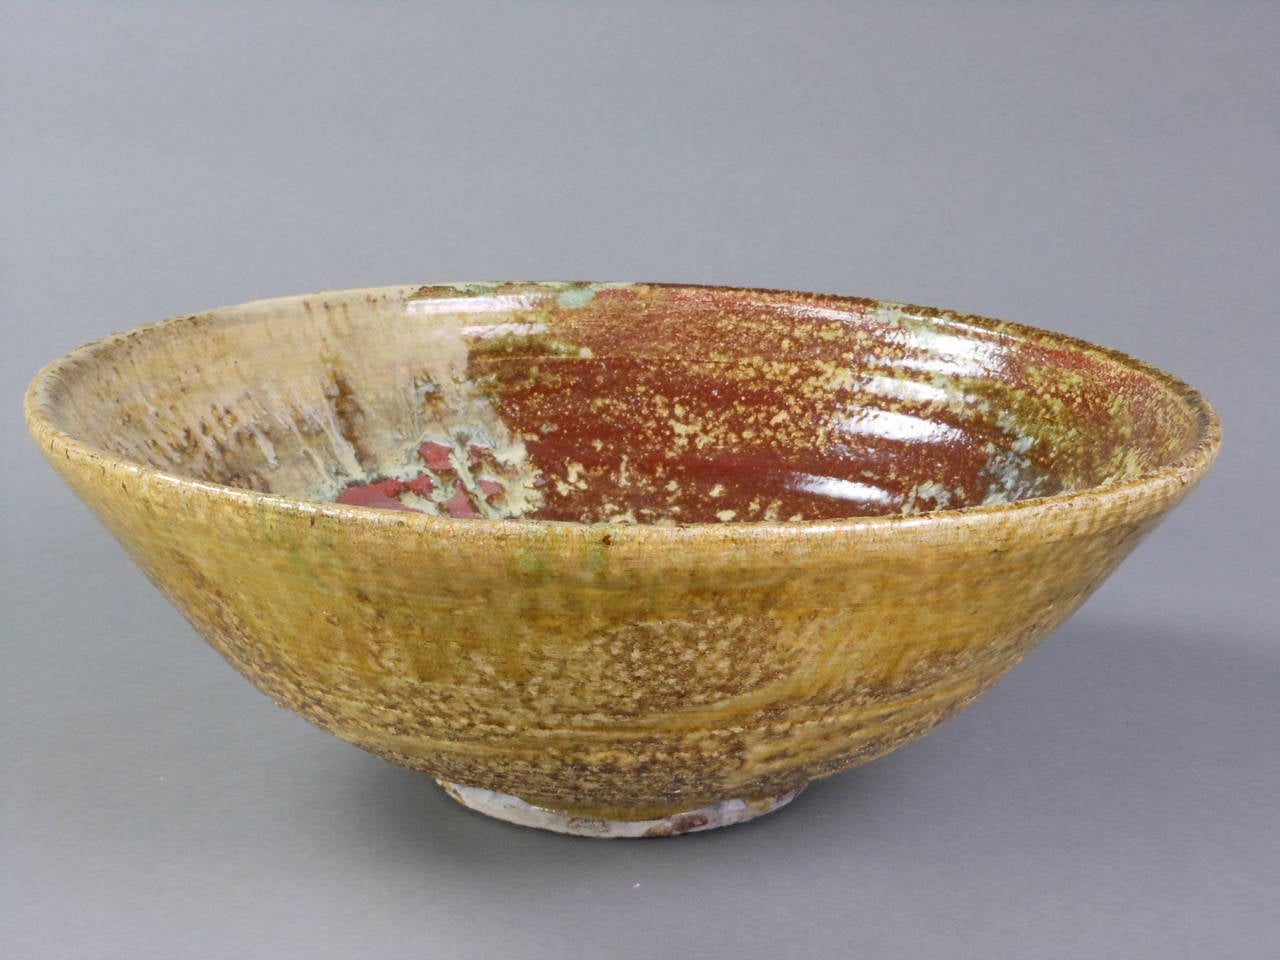 Mottled Brown and Green Glazed Stoneware Bowl 1